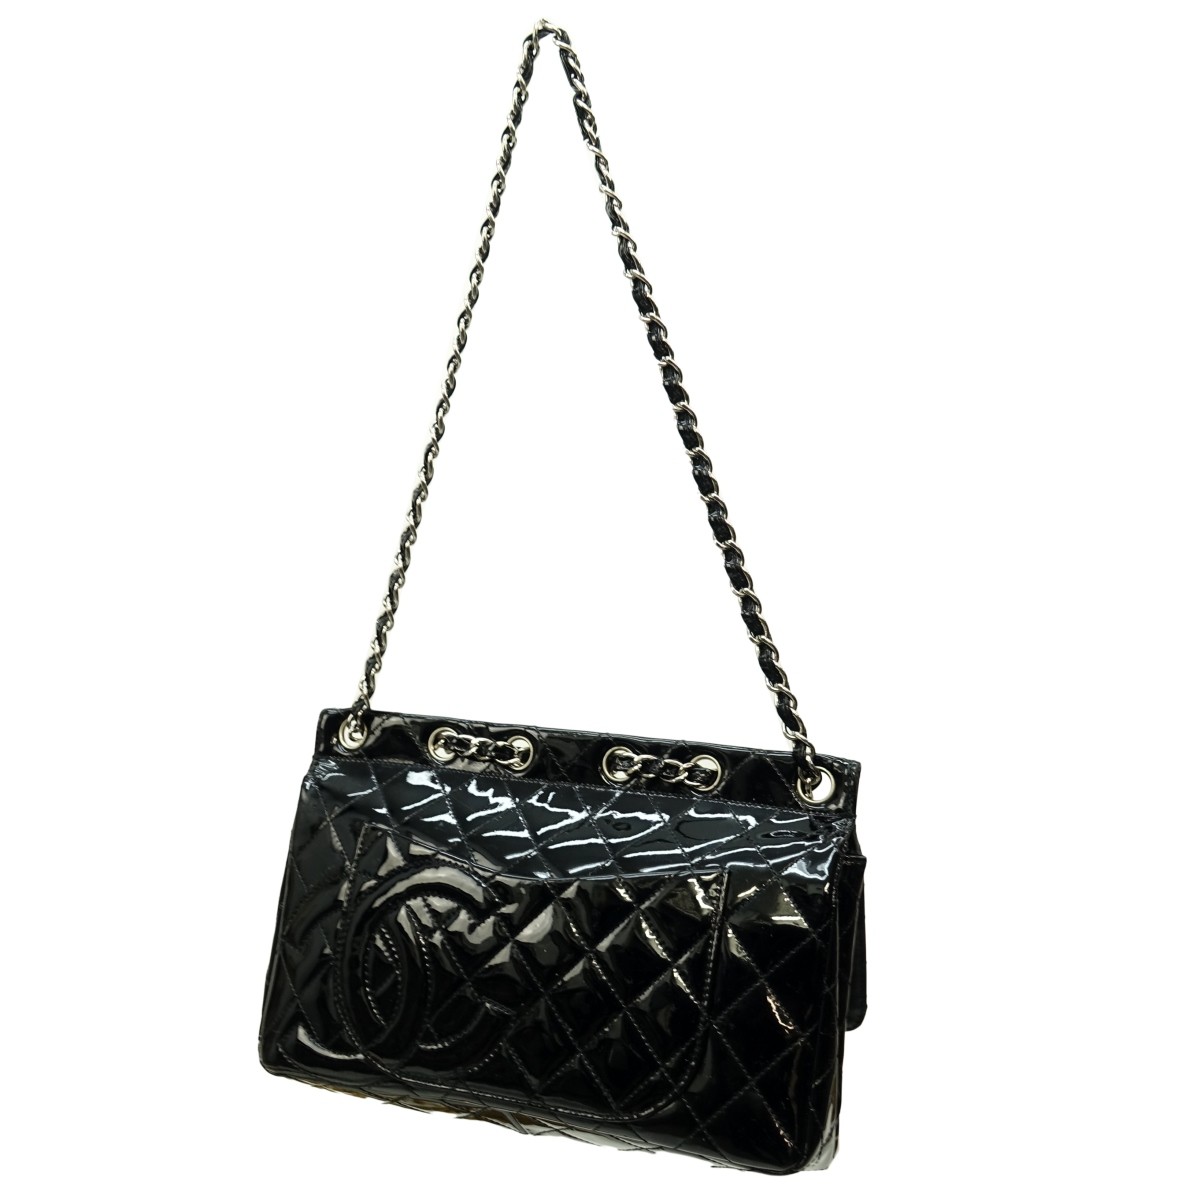 Chanel Jumbo Black Patent Leather Quilted Purse | Kodner Auctions